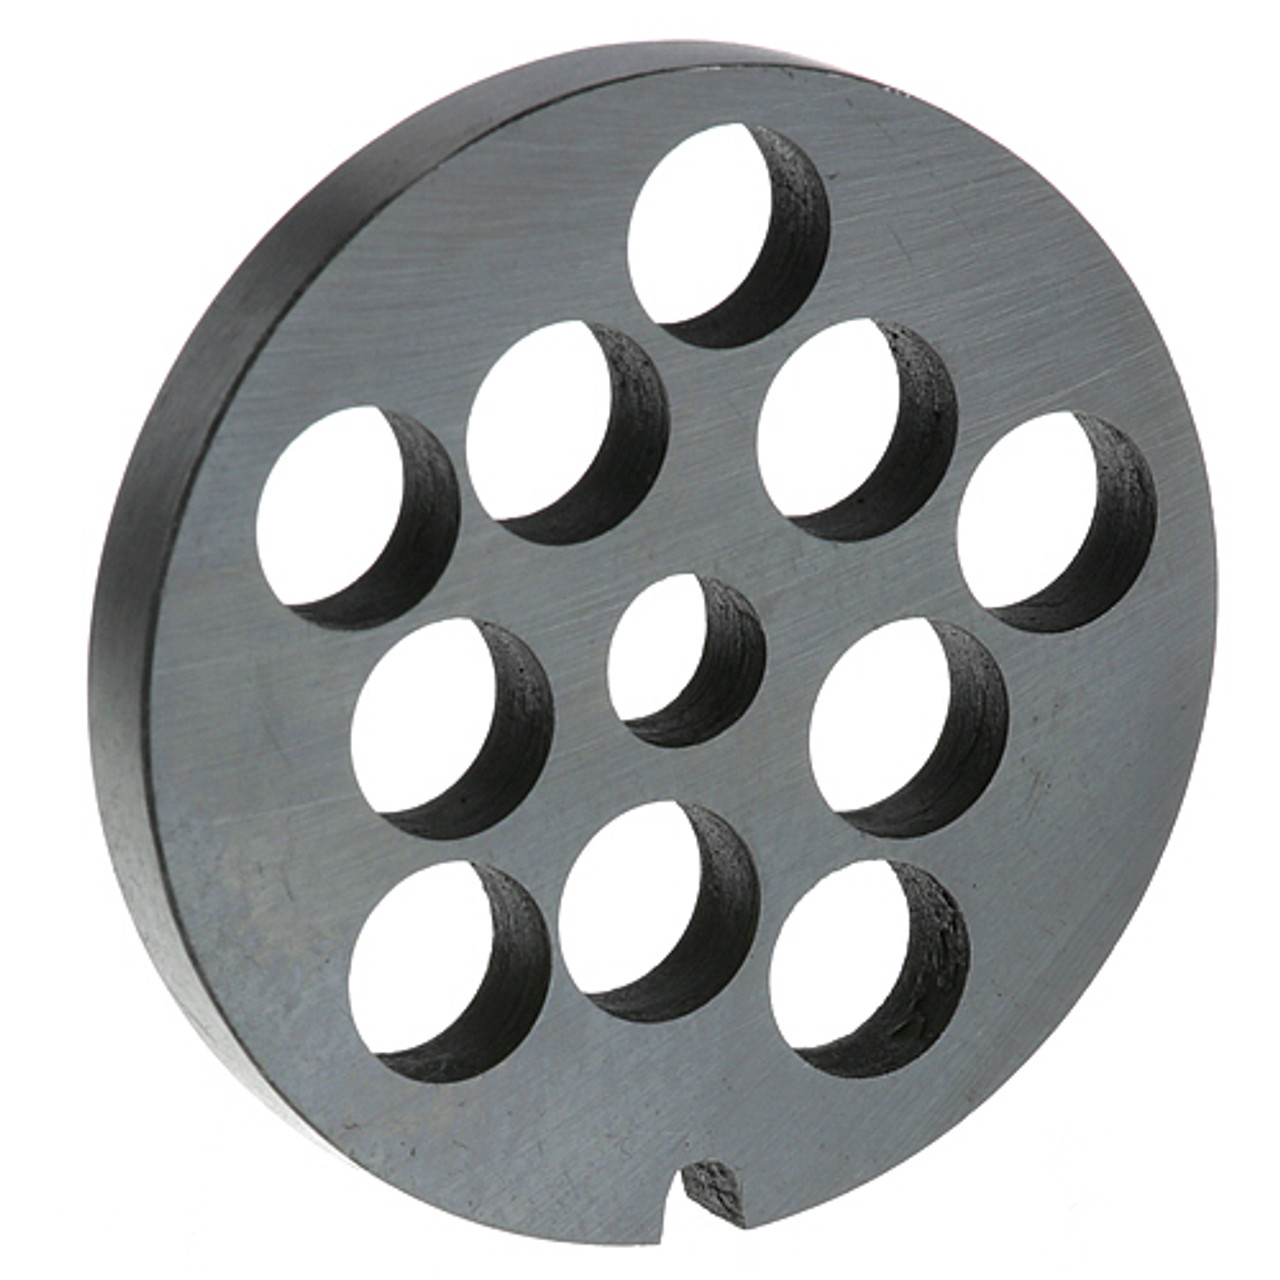 Grinder Plate - 1/2" - Replacement Part For Blakeslee 01906